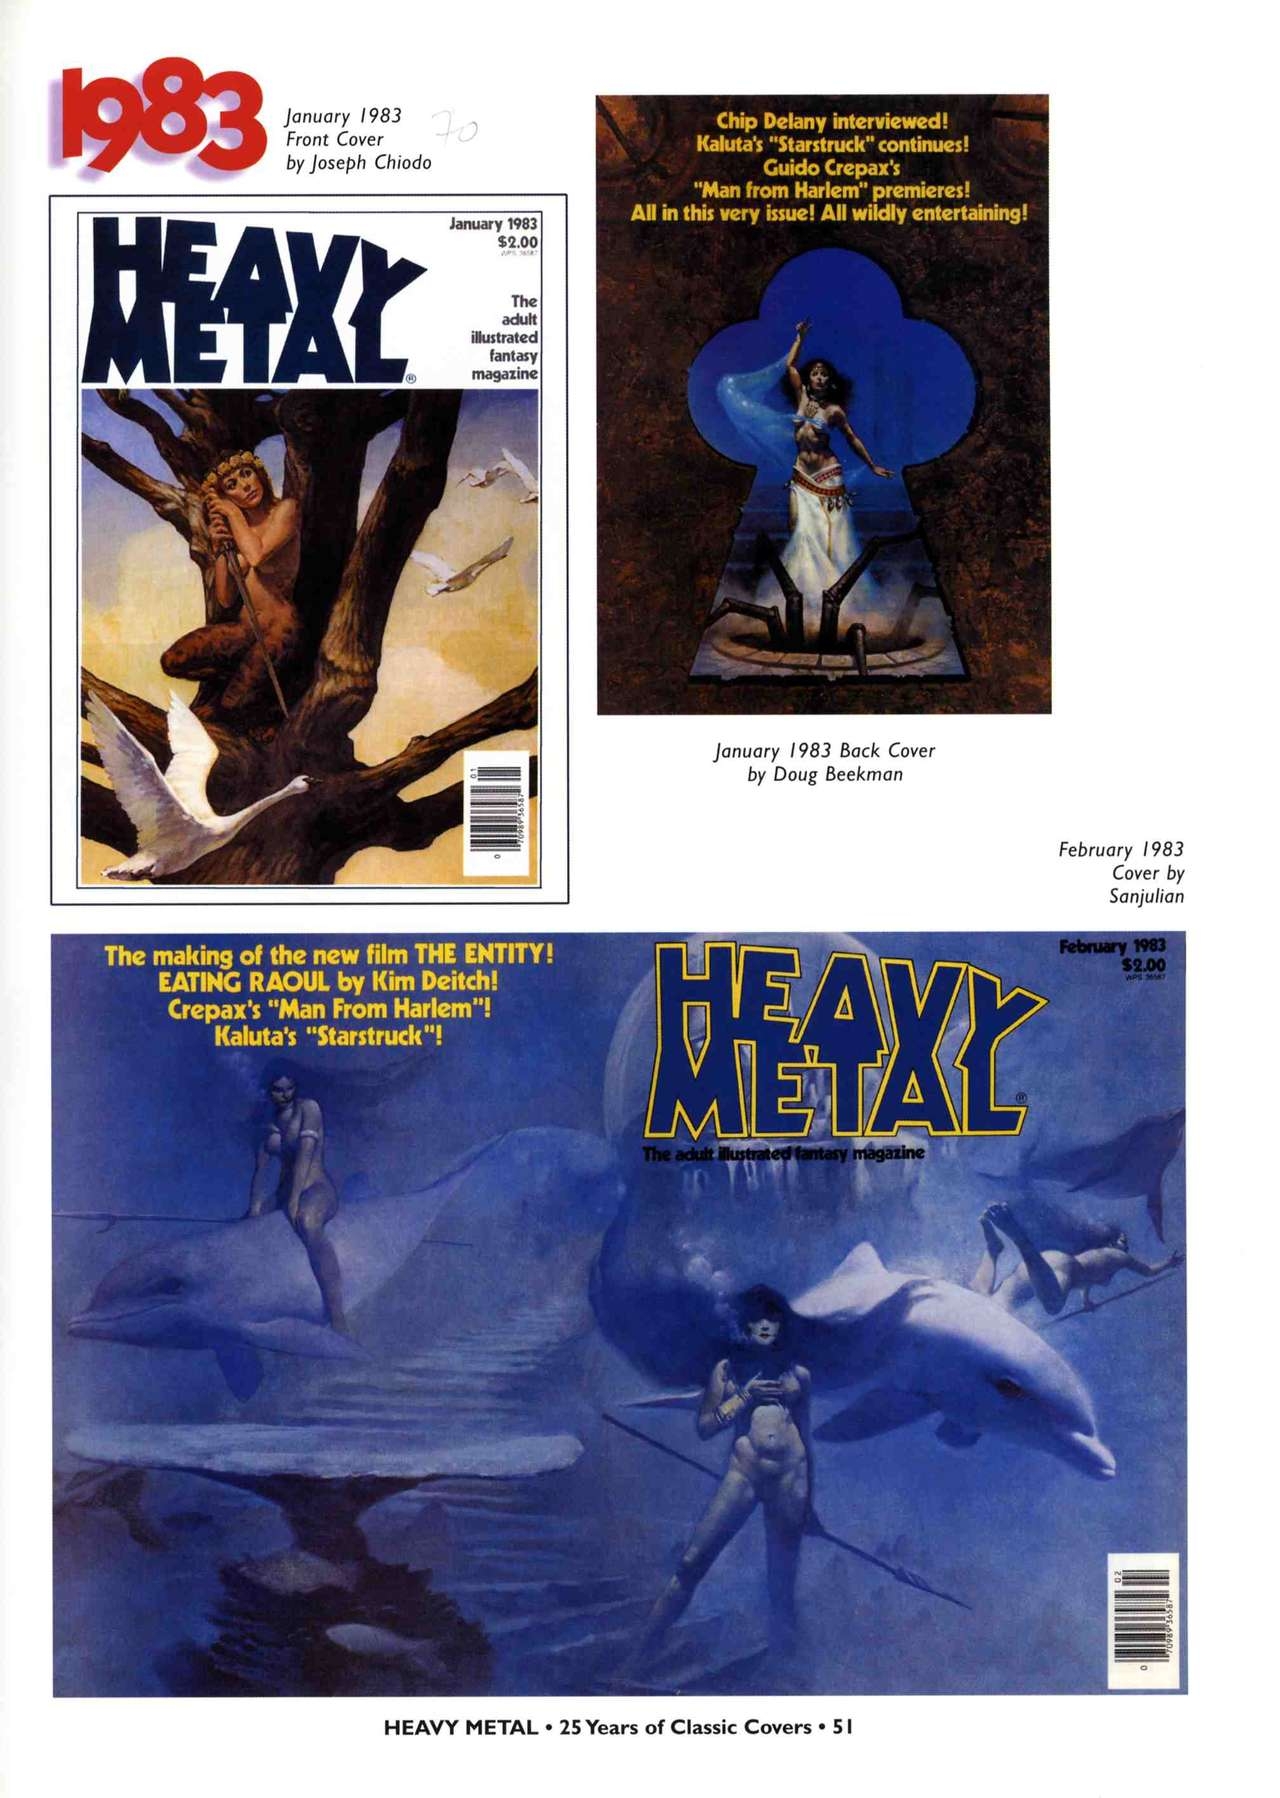 HEAVY METAL 25 Years of Classic Covers 56